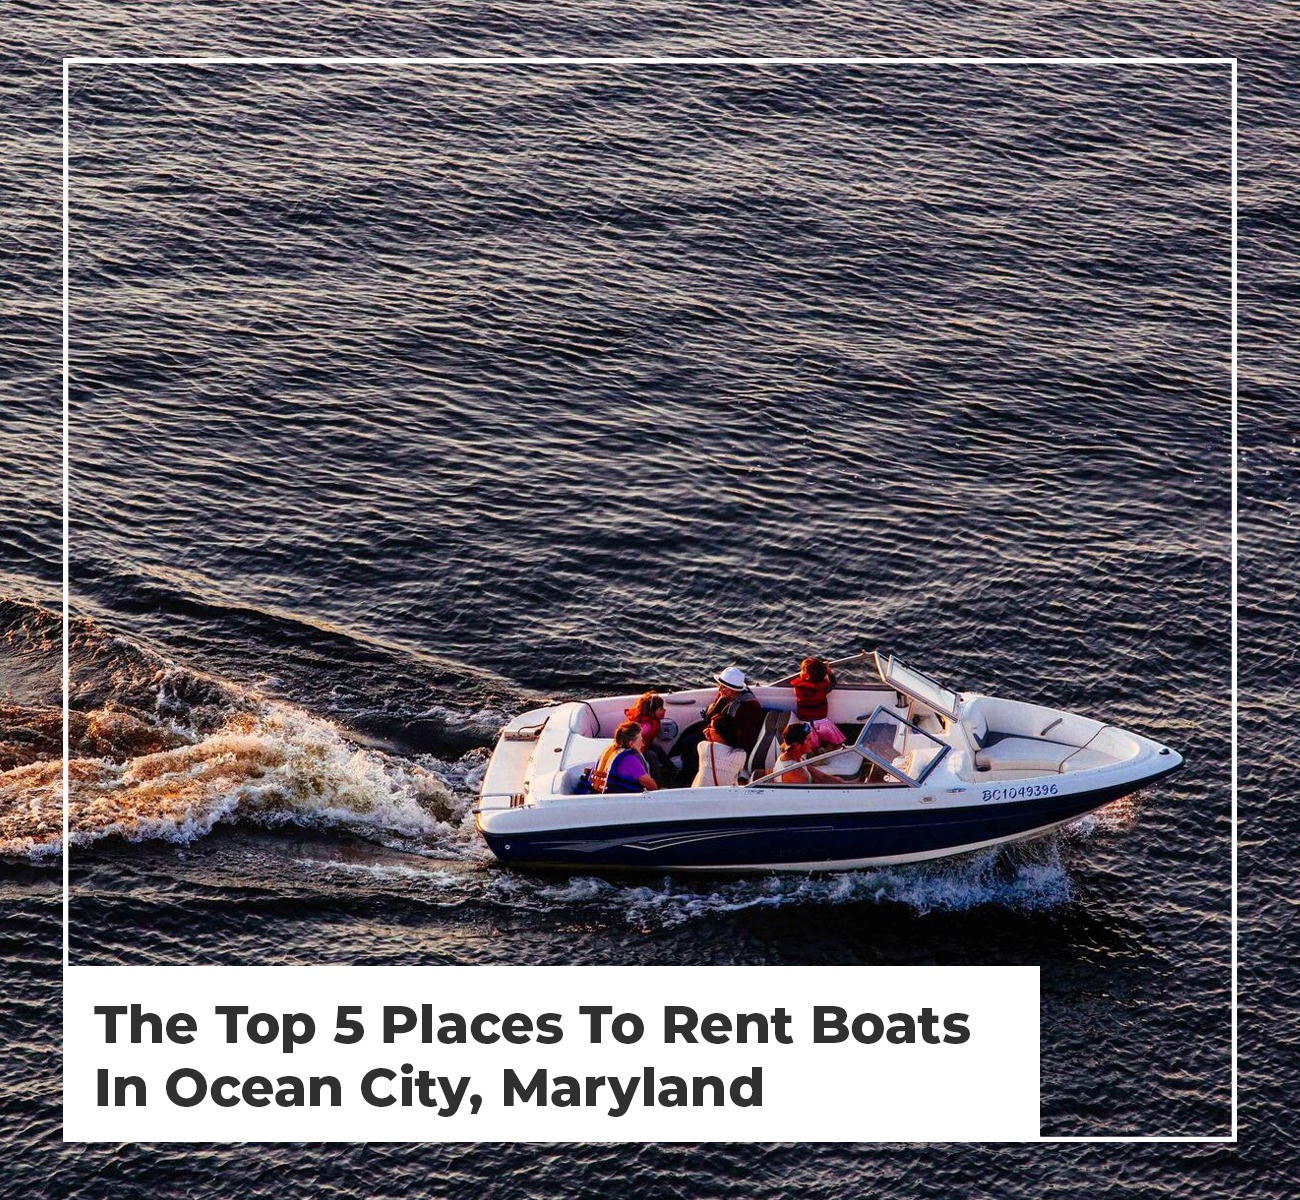 The Top 5 Places To Rent Boats In Ocean City, Maryland